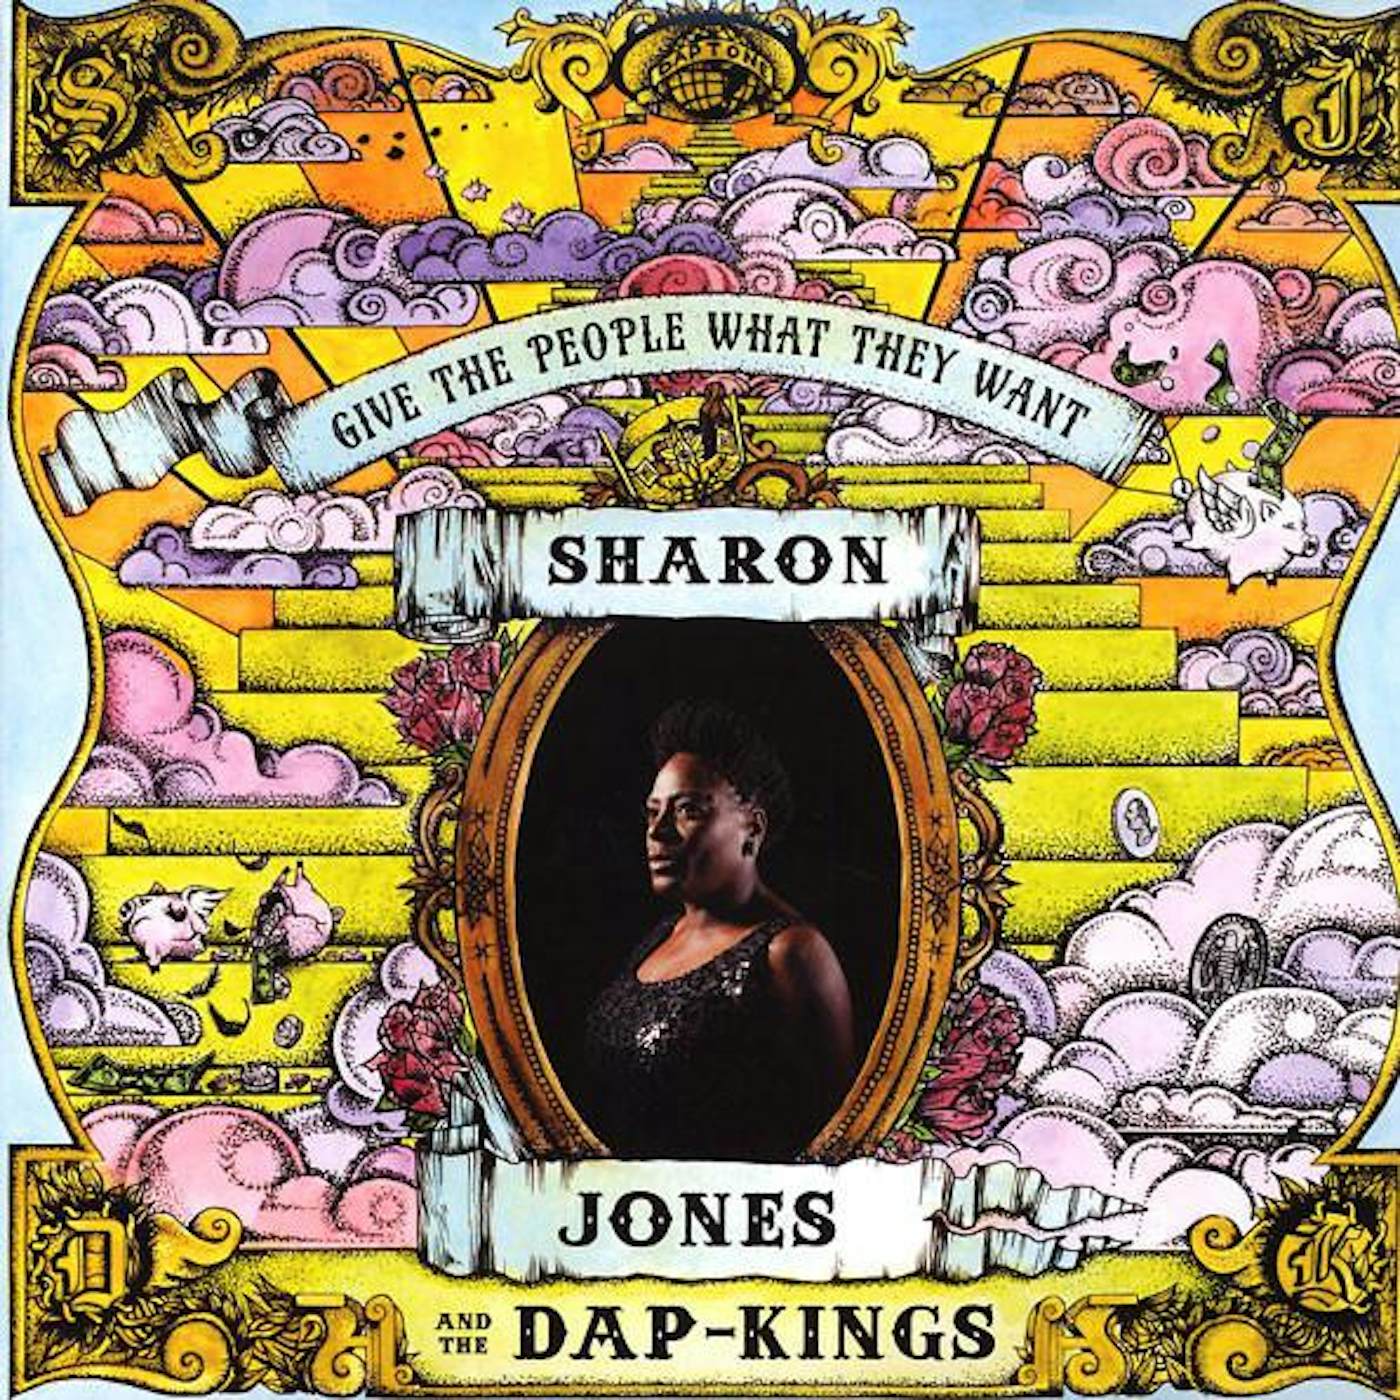 Sharon Jones & The Dap-Kings GIVE THE PEOPLE WHAT THEY WANT CD